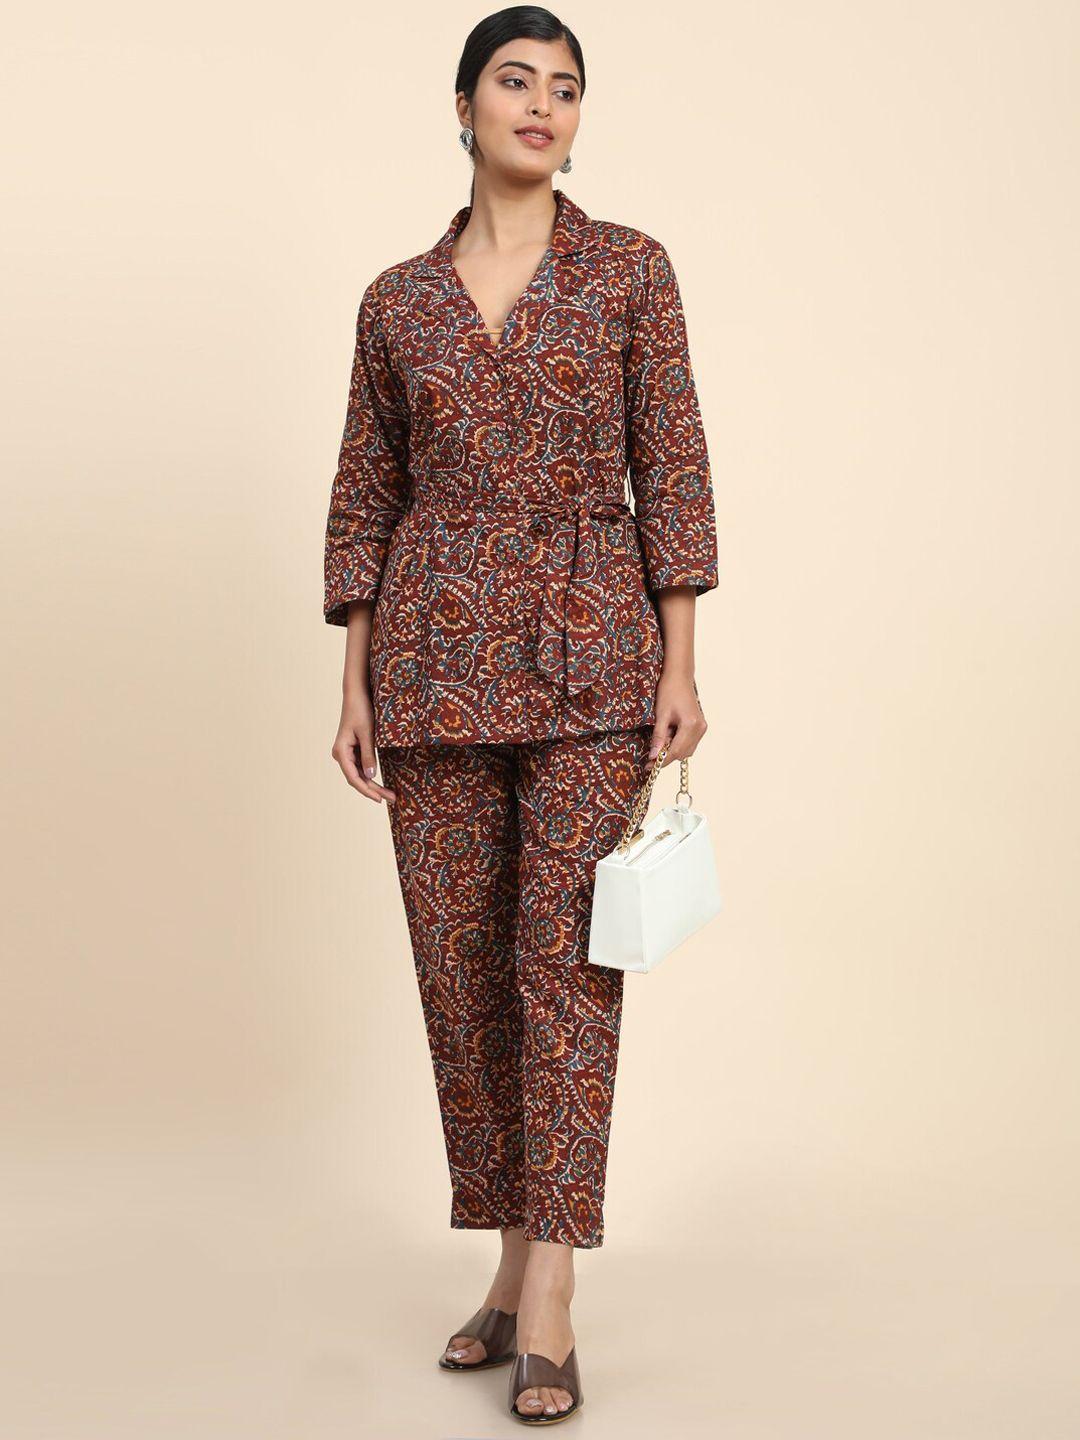 baesd ethnic printed lapel collar top & boot-cut wrinkle free trousers pant co-ord set